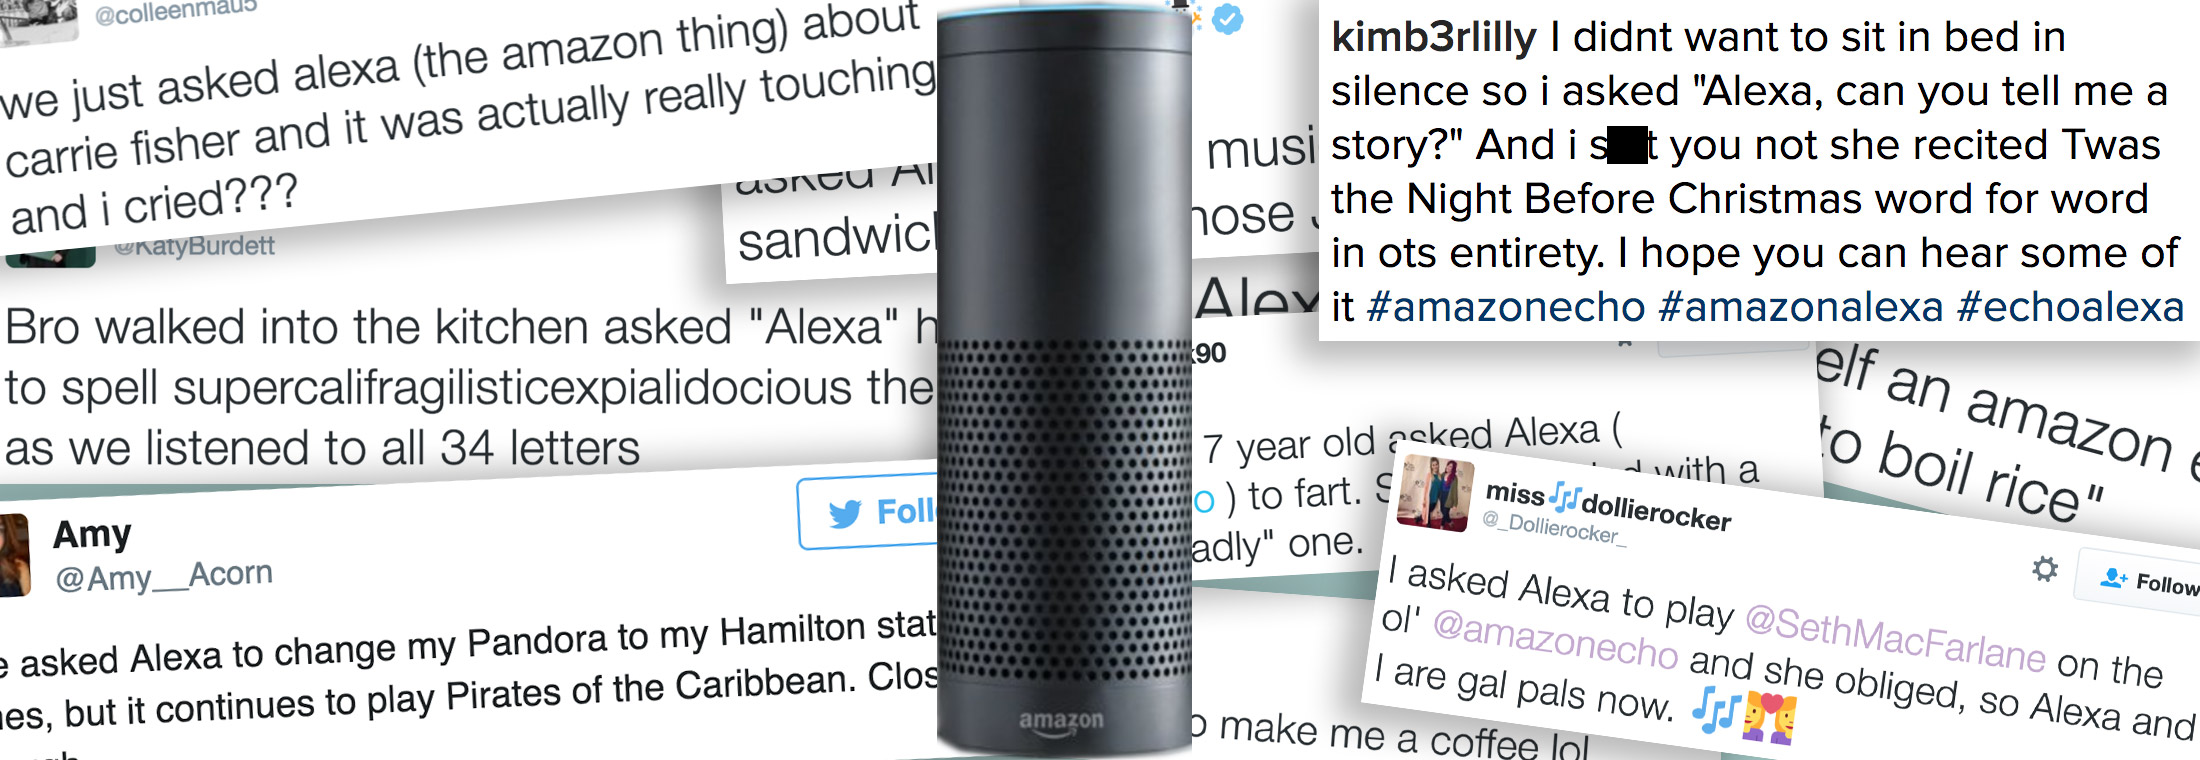 Valg vision Lejlighedsvis The Most Anarchic Questions to Ask Alexa From Hundreds of Owners |  Brandwatch